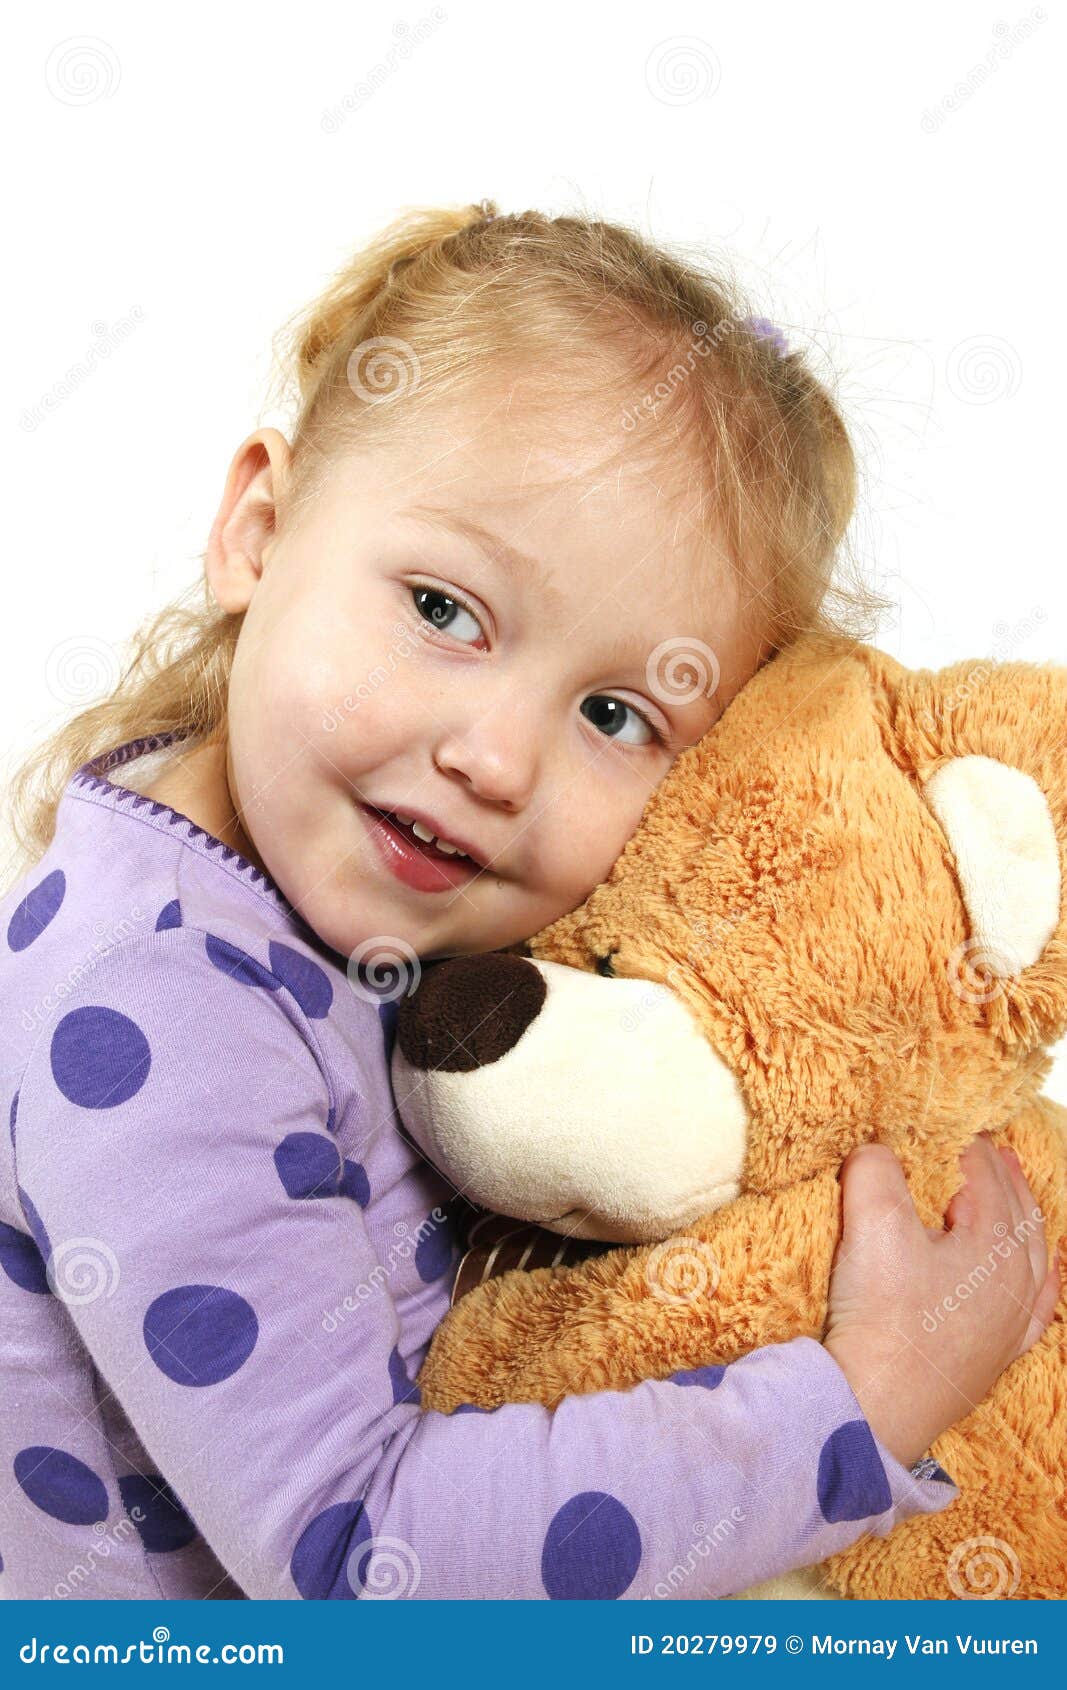 Little Girl Hugging A Teddy Bear Royalty Free Stock Images - Image ...